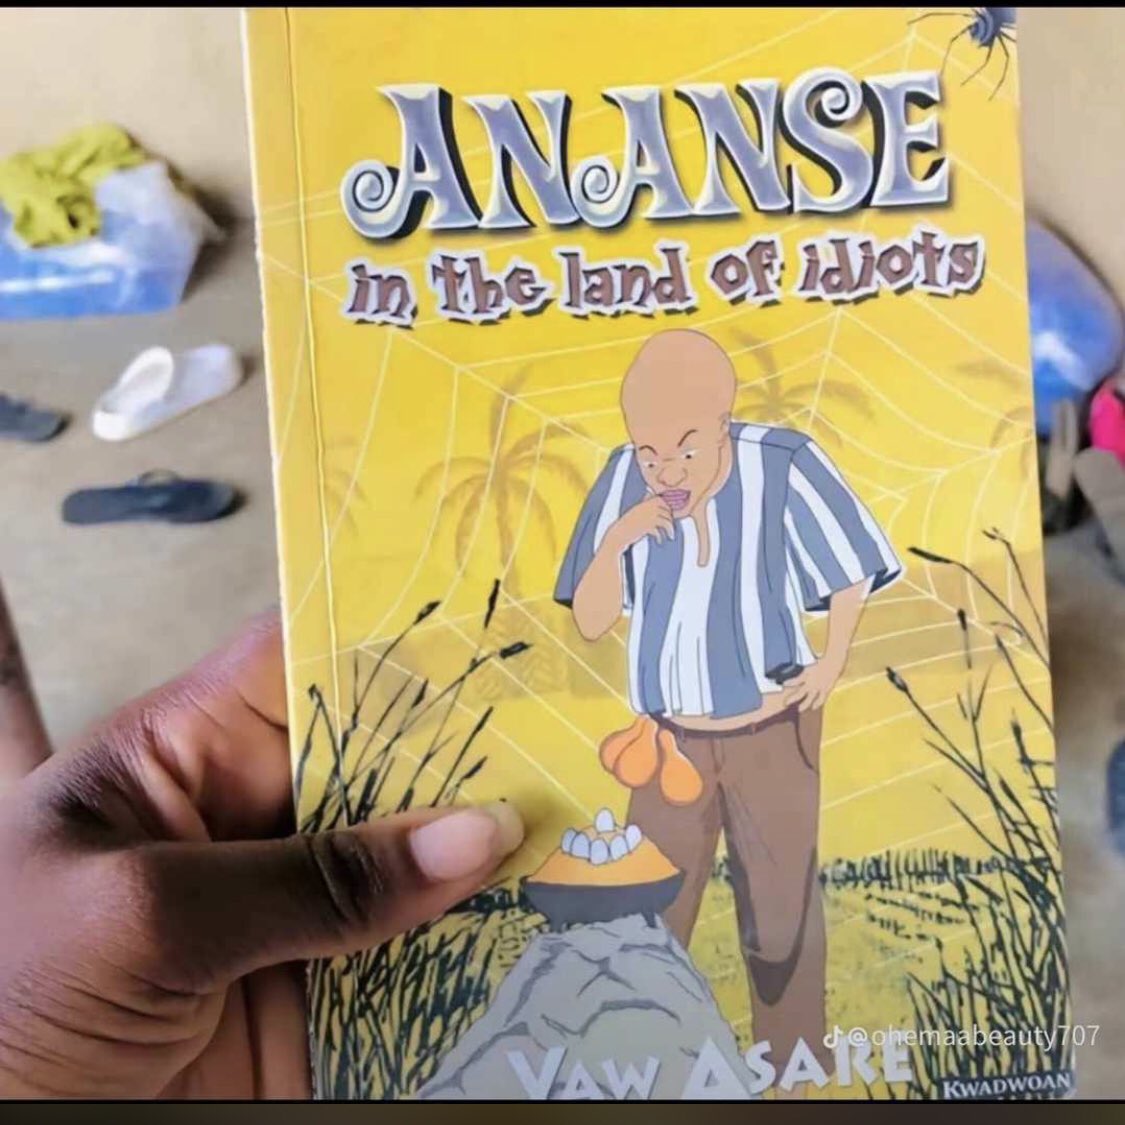 General Arts Students always reading this book at Preps. 😂😂😂